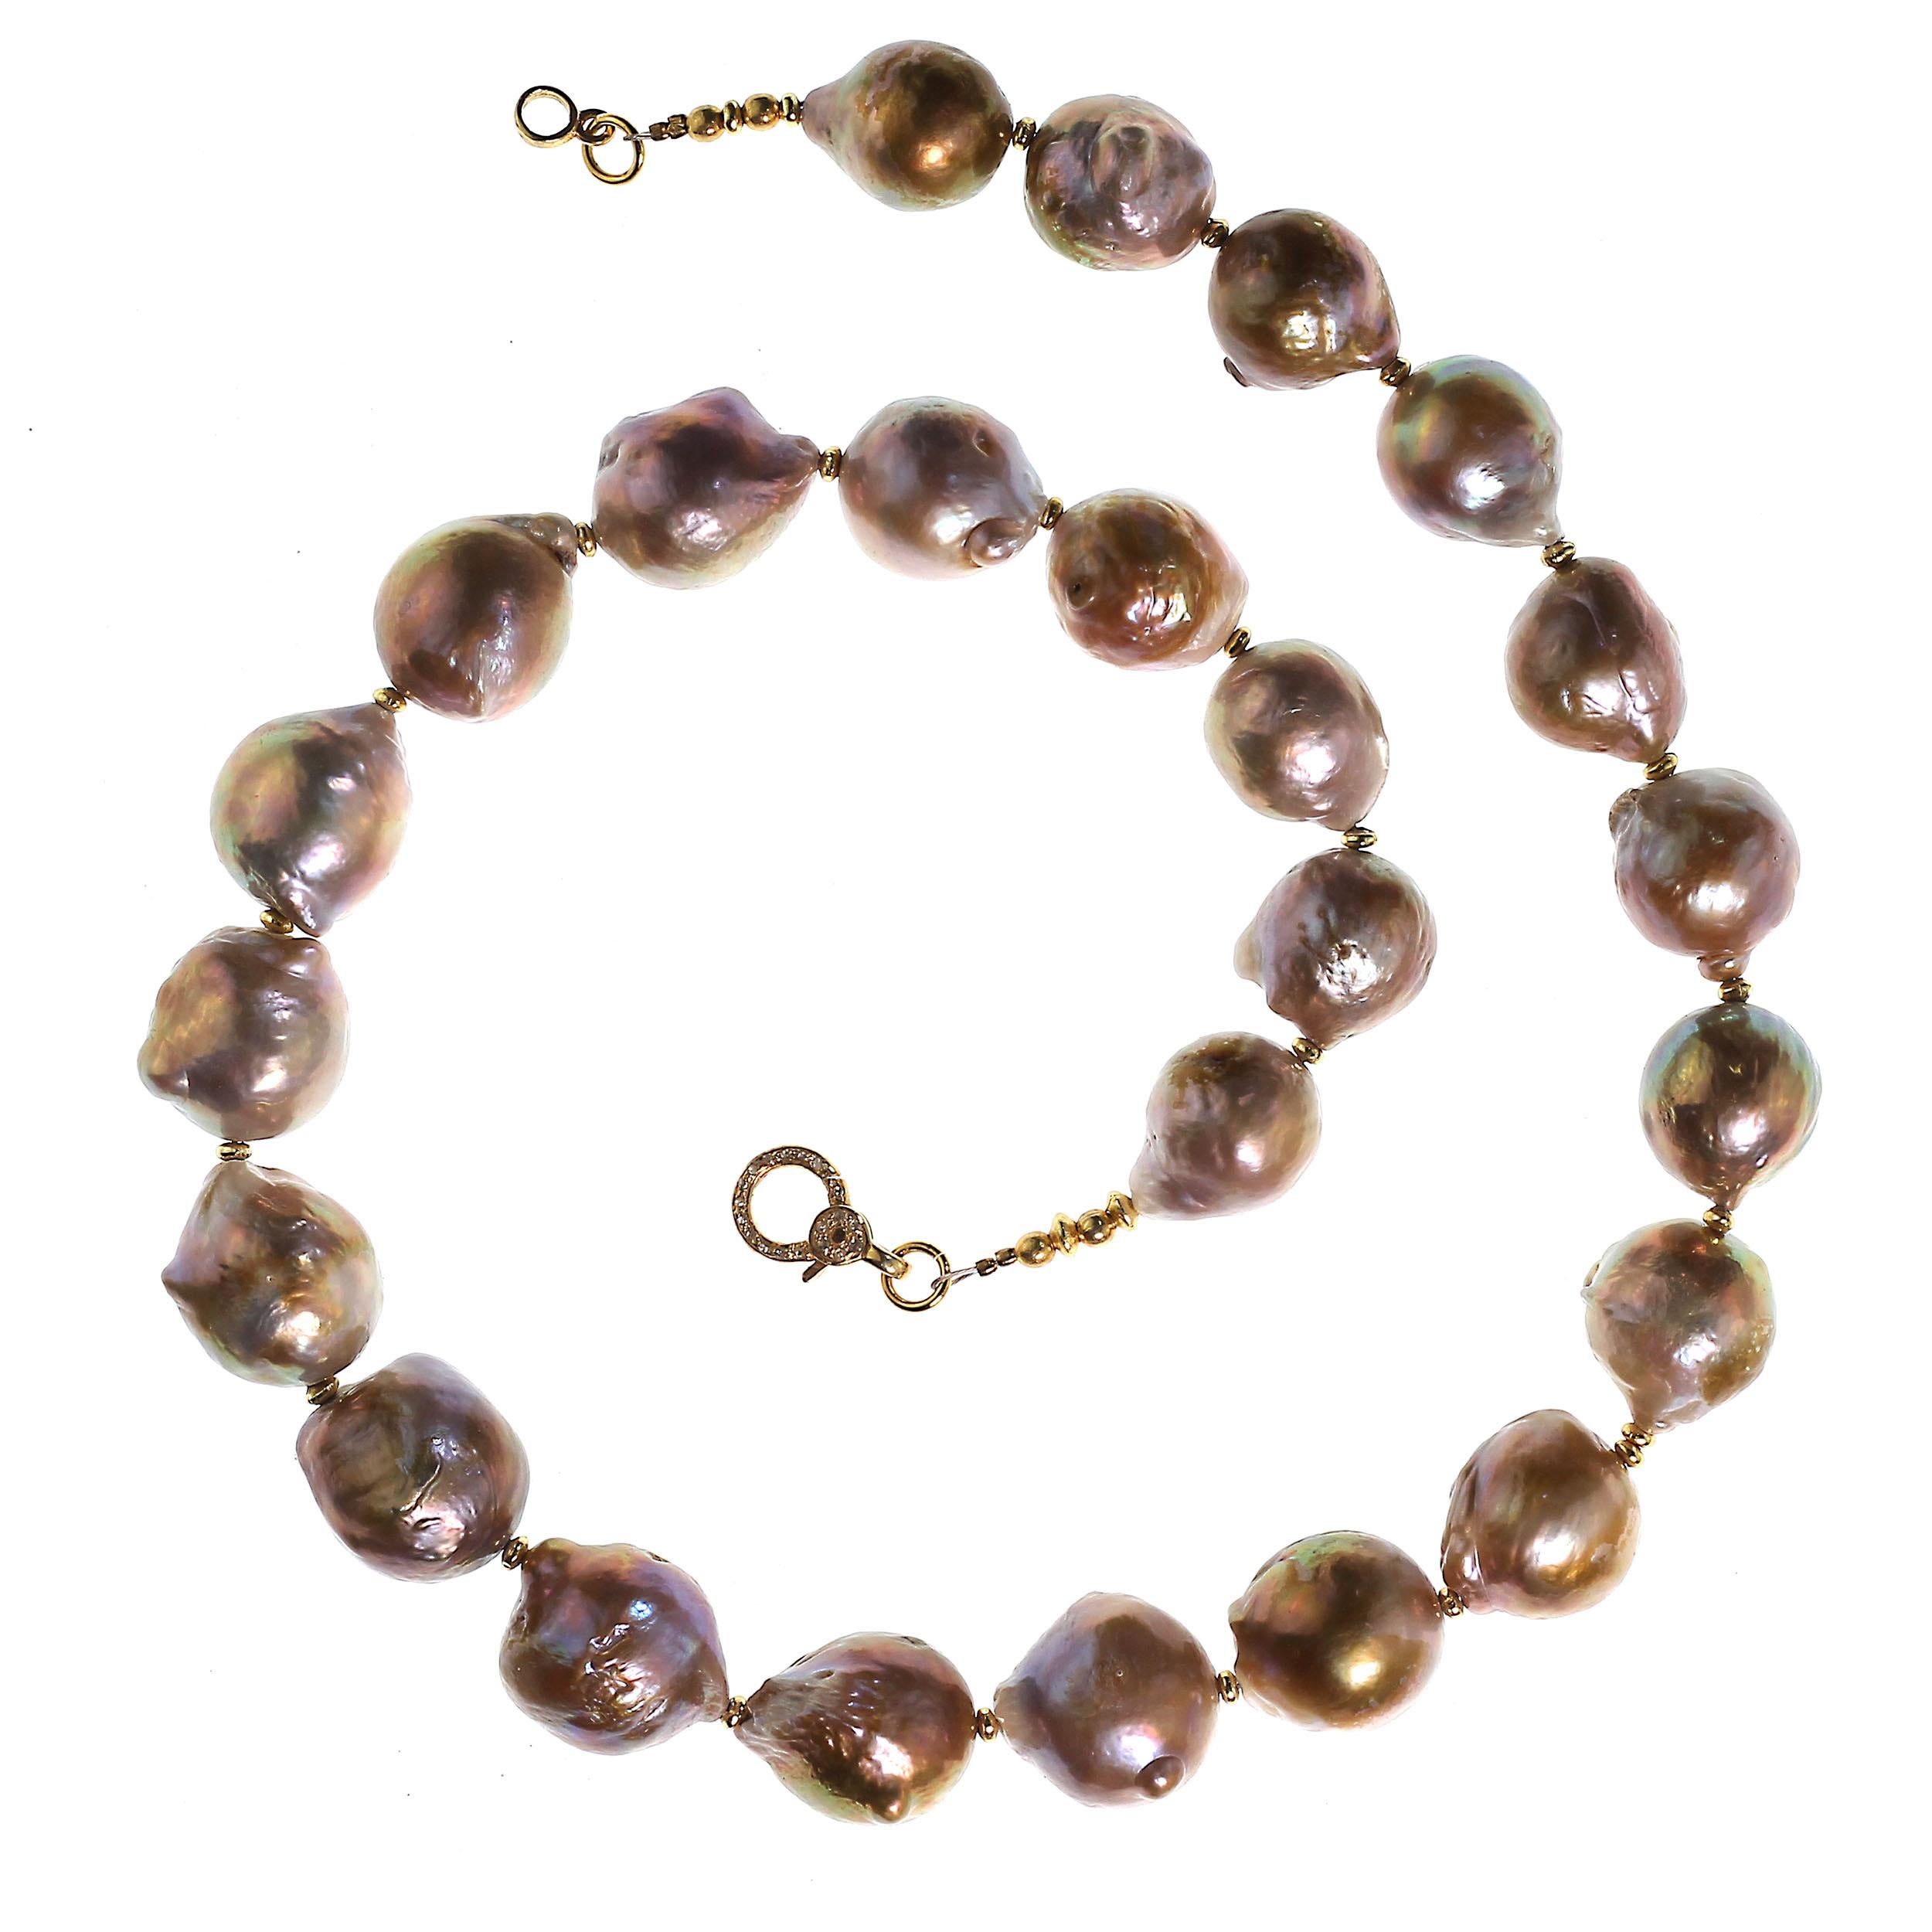 Artisan Glamorous Iridescent Wrinkle Pearl Necklace from Gemjunky